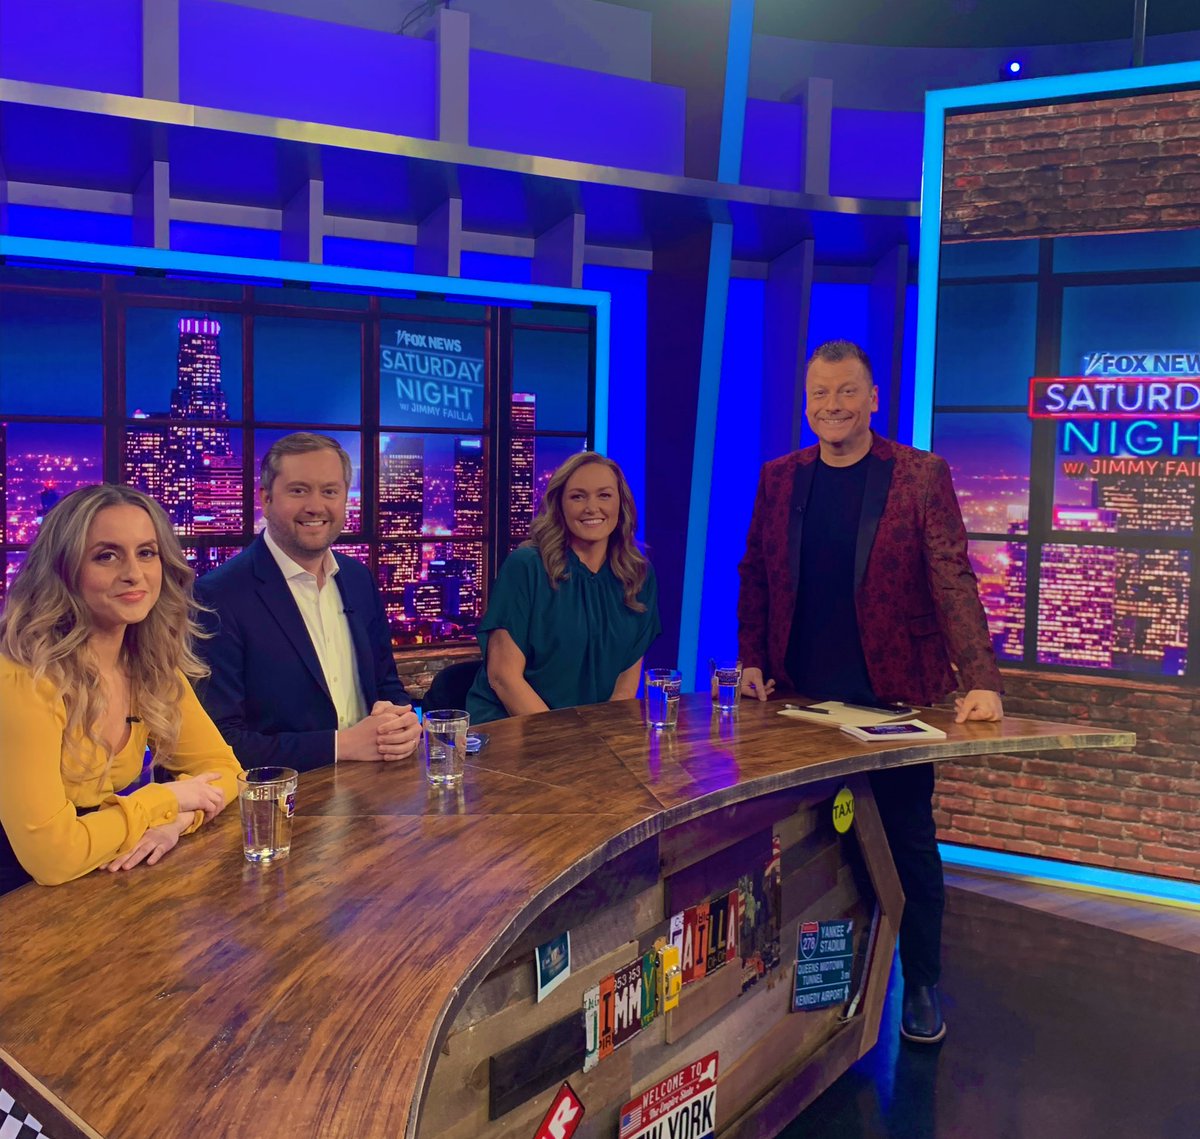 📺 Tune into @FNSaturdayNight hosted by @jimmyfailla at 10p on @FoxNews TONIGHT. Joining Jenny Failla, @cvpayne, and @PhilanthropyGal for the best hour on TV. #fnsnwithjimmyfailla